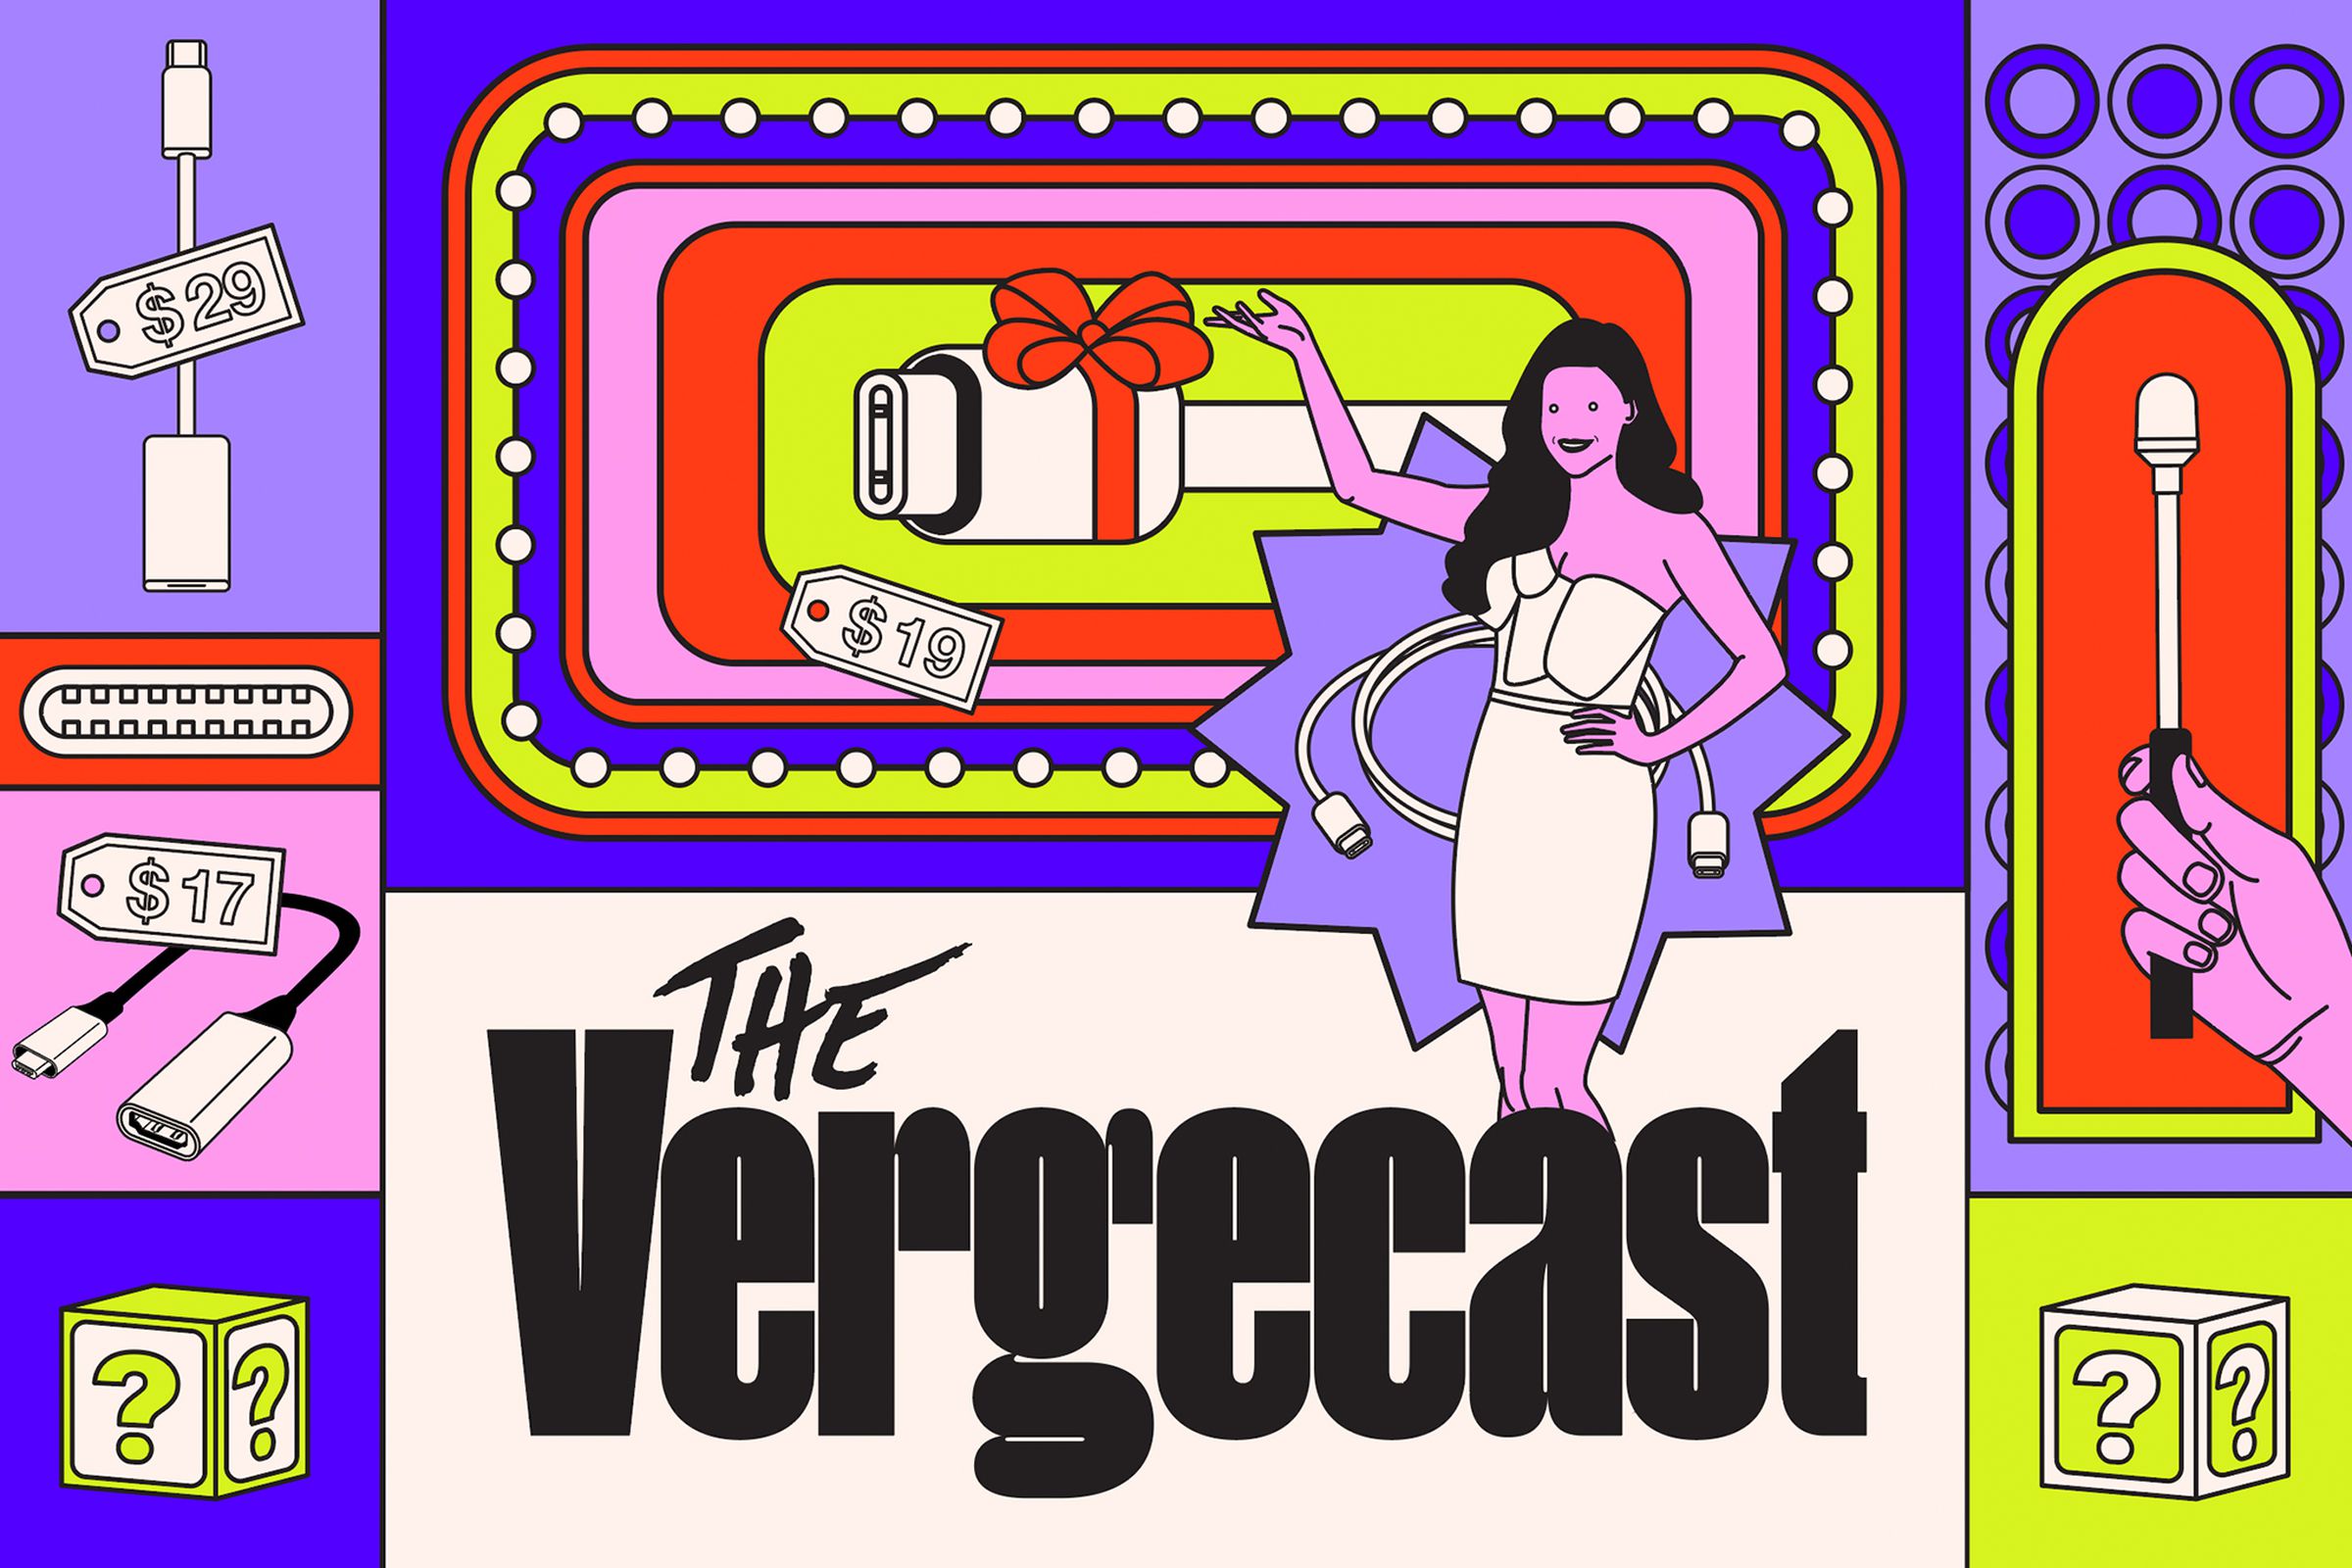 Graphic illustration for a special edition of The Vergecast.